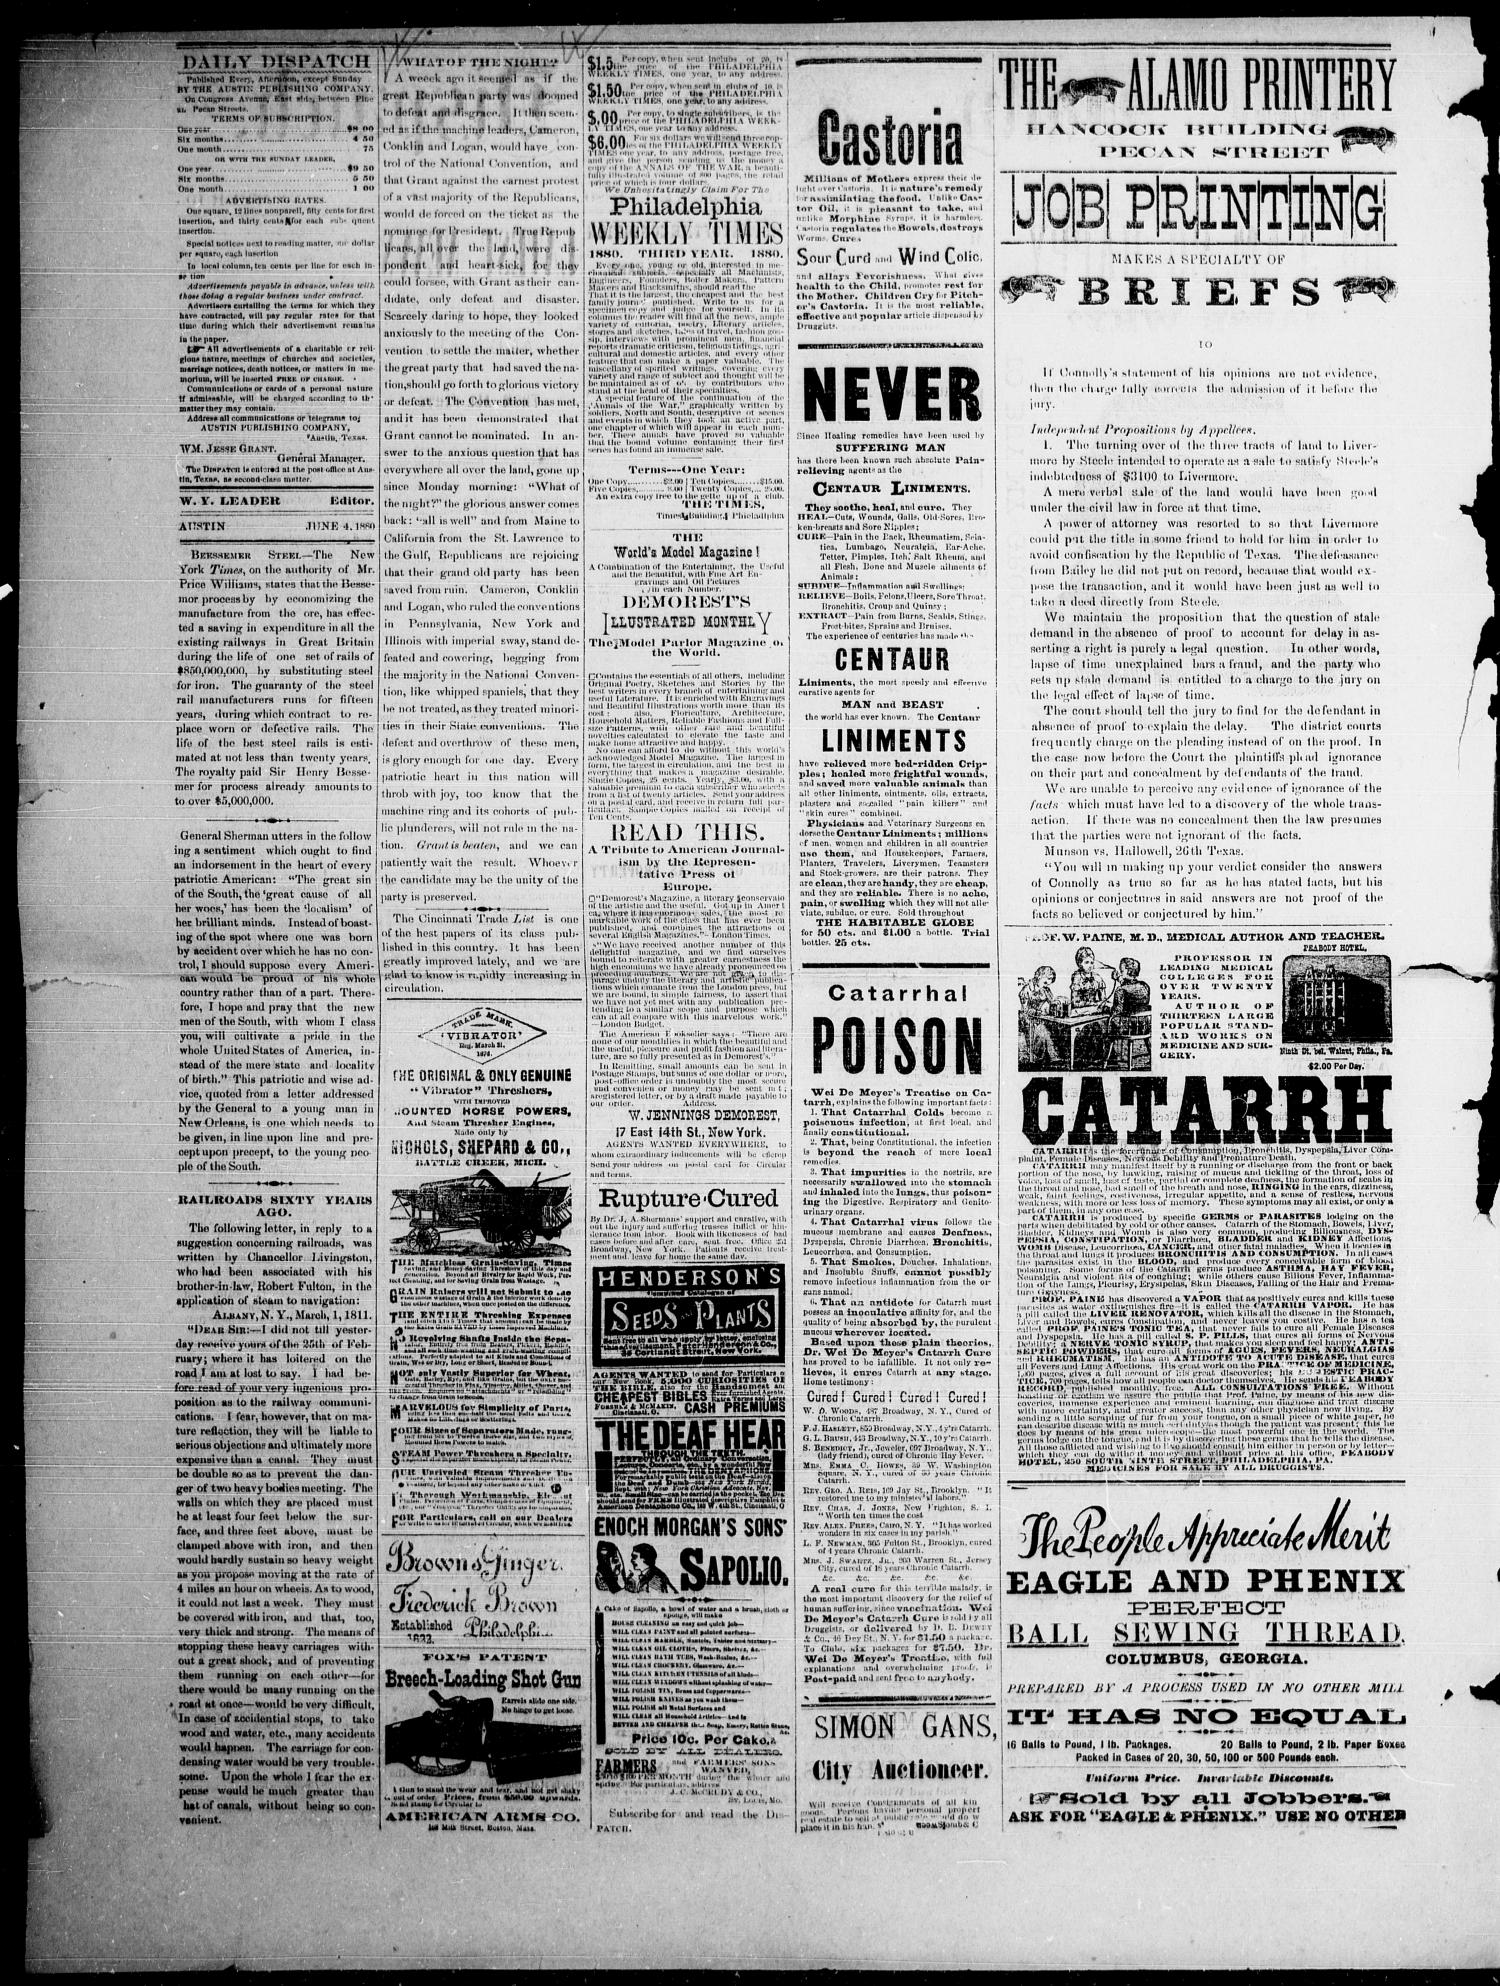 the daily dispatch austin tex vol 1 no 105 ed 1 friday june 4 1880 page 2 of 4 the portal to texas history the portal to texas history unt